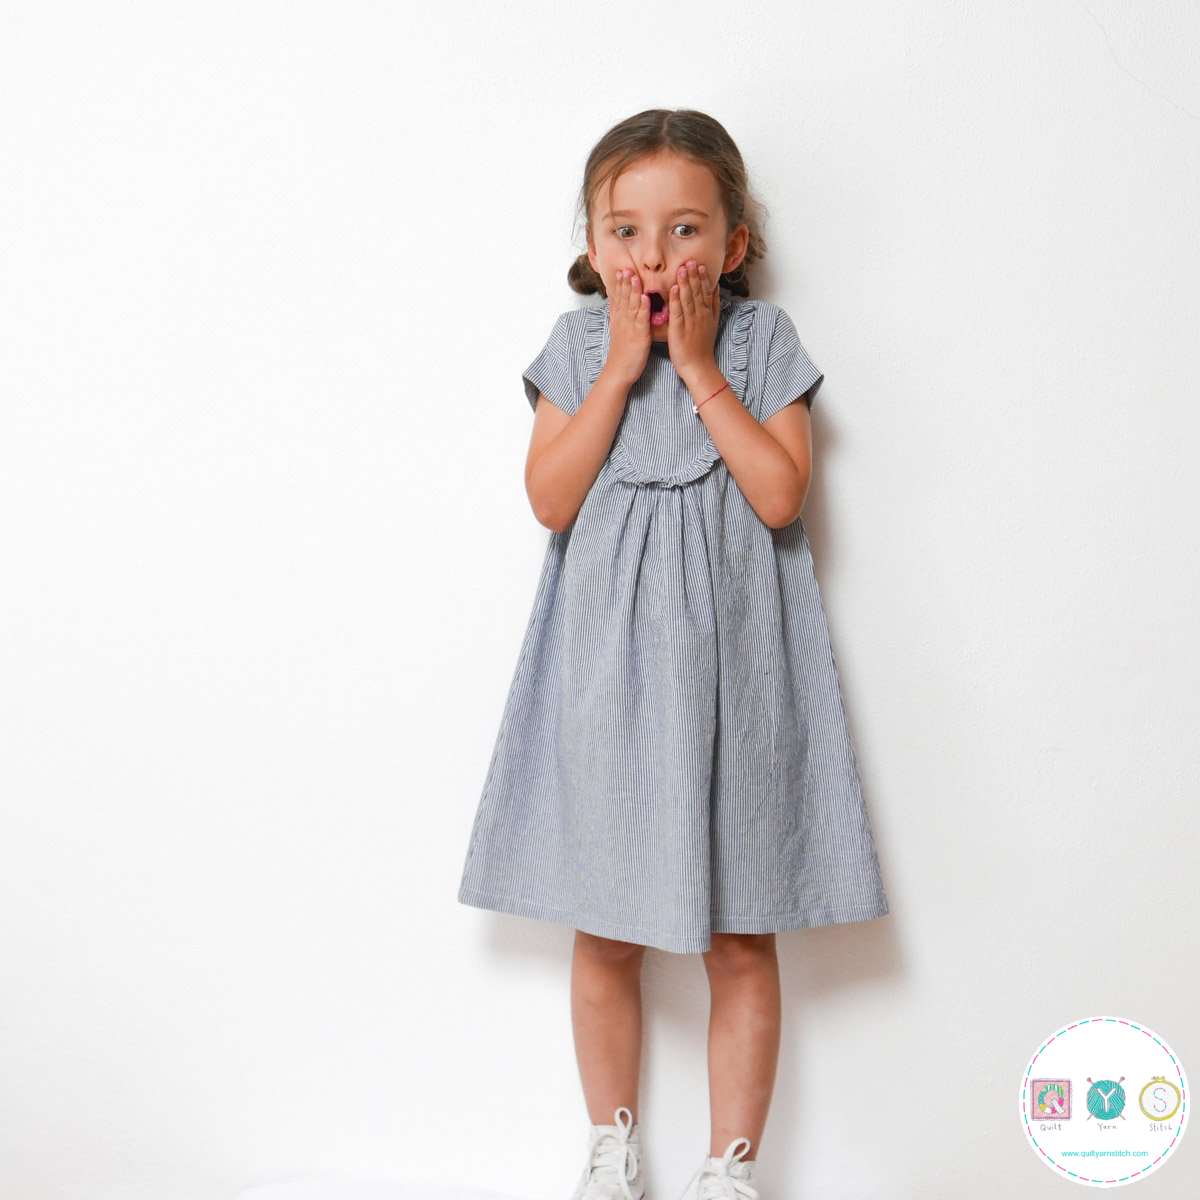 Ikatee- Ida Dress Blouse and T-Shirt Sewing Pattern - French Sewing Patterns for Kids - Childrens Dressmaking